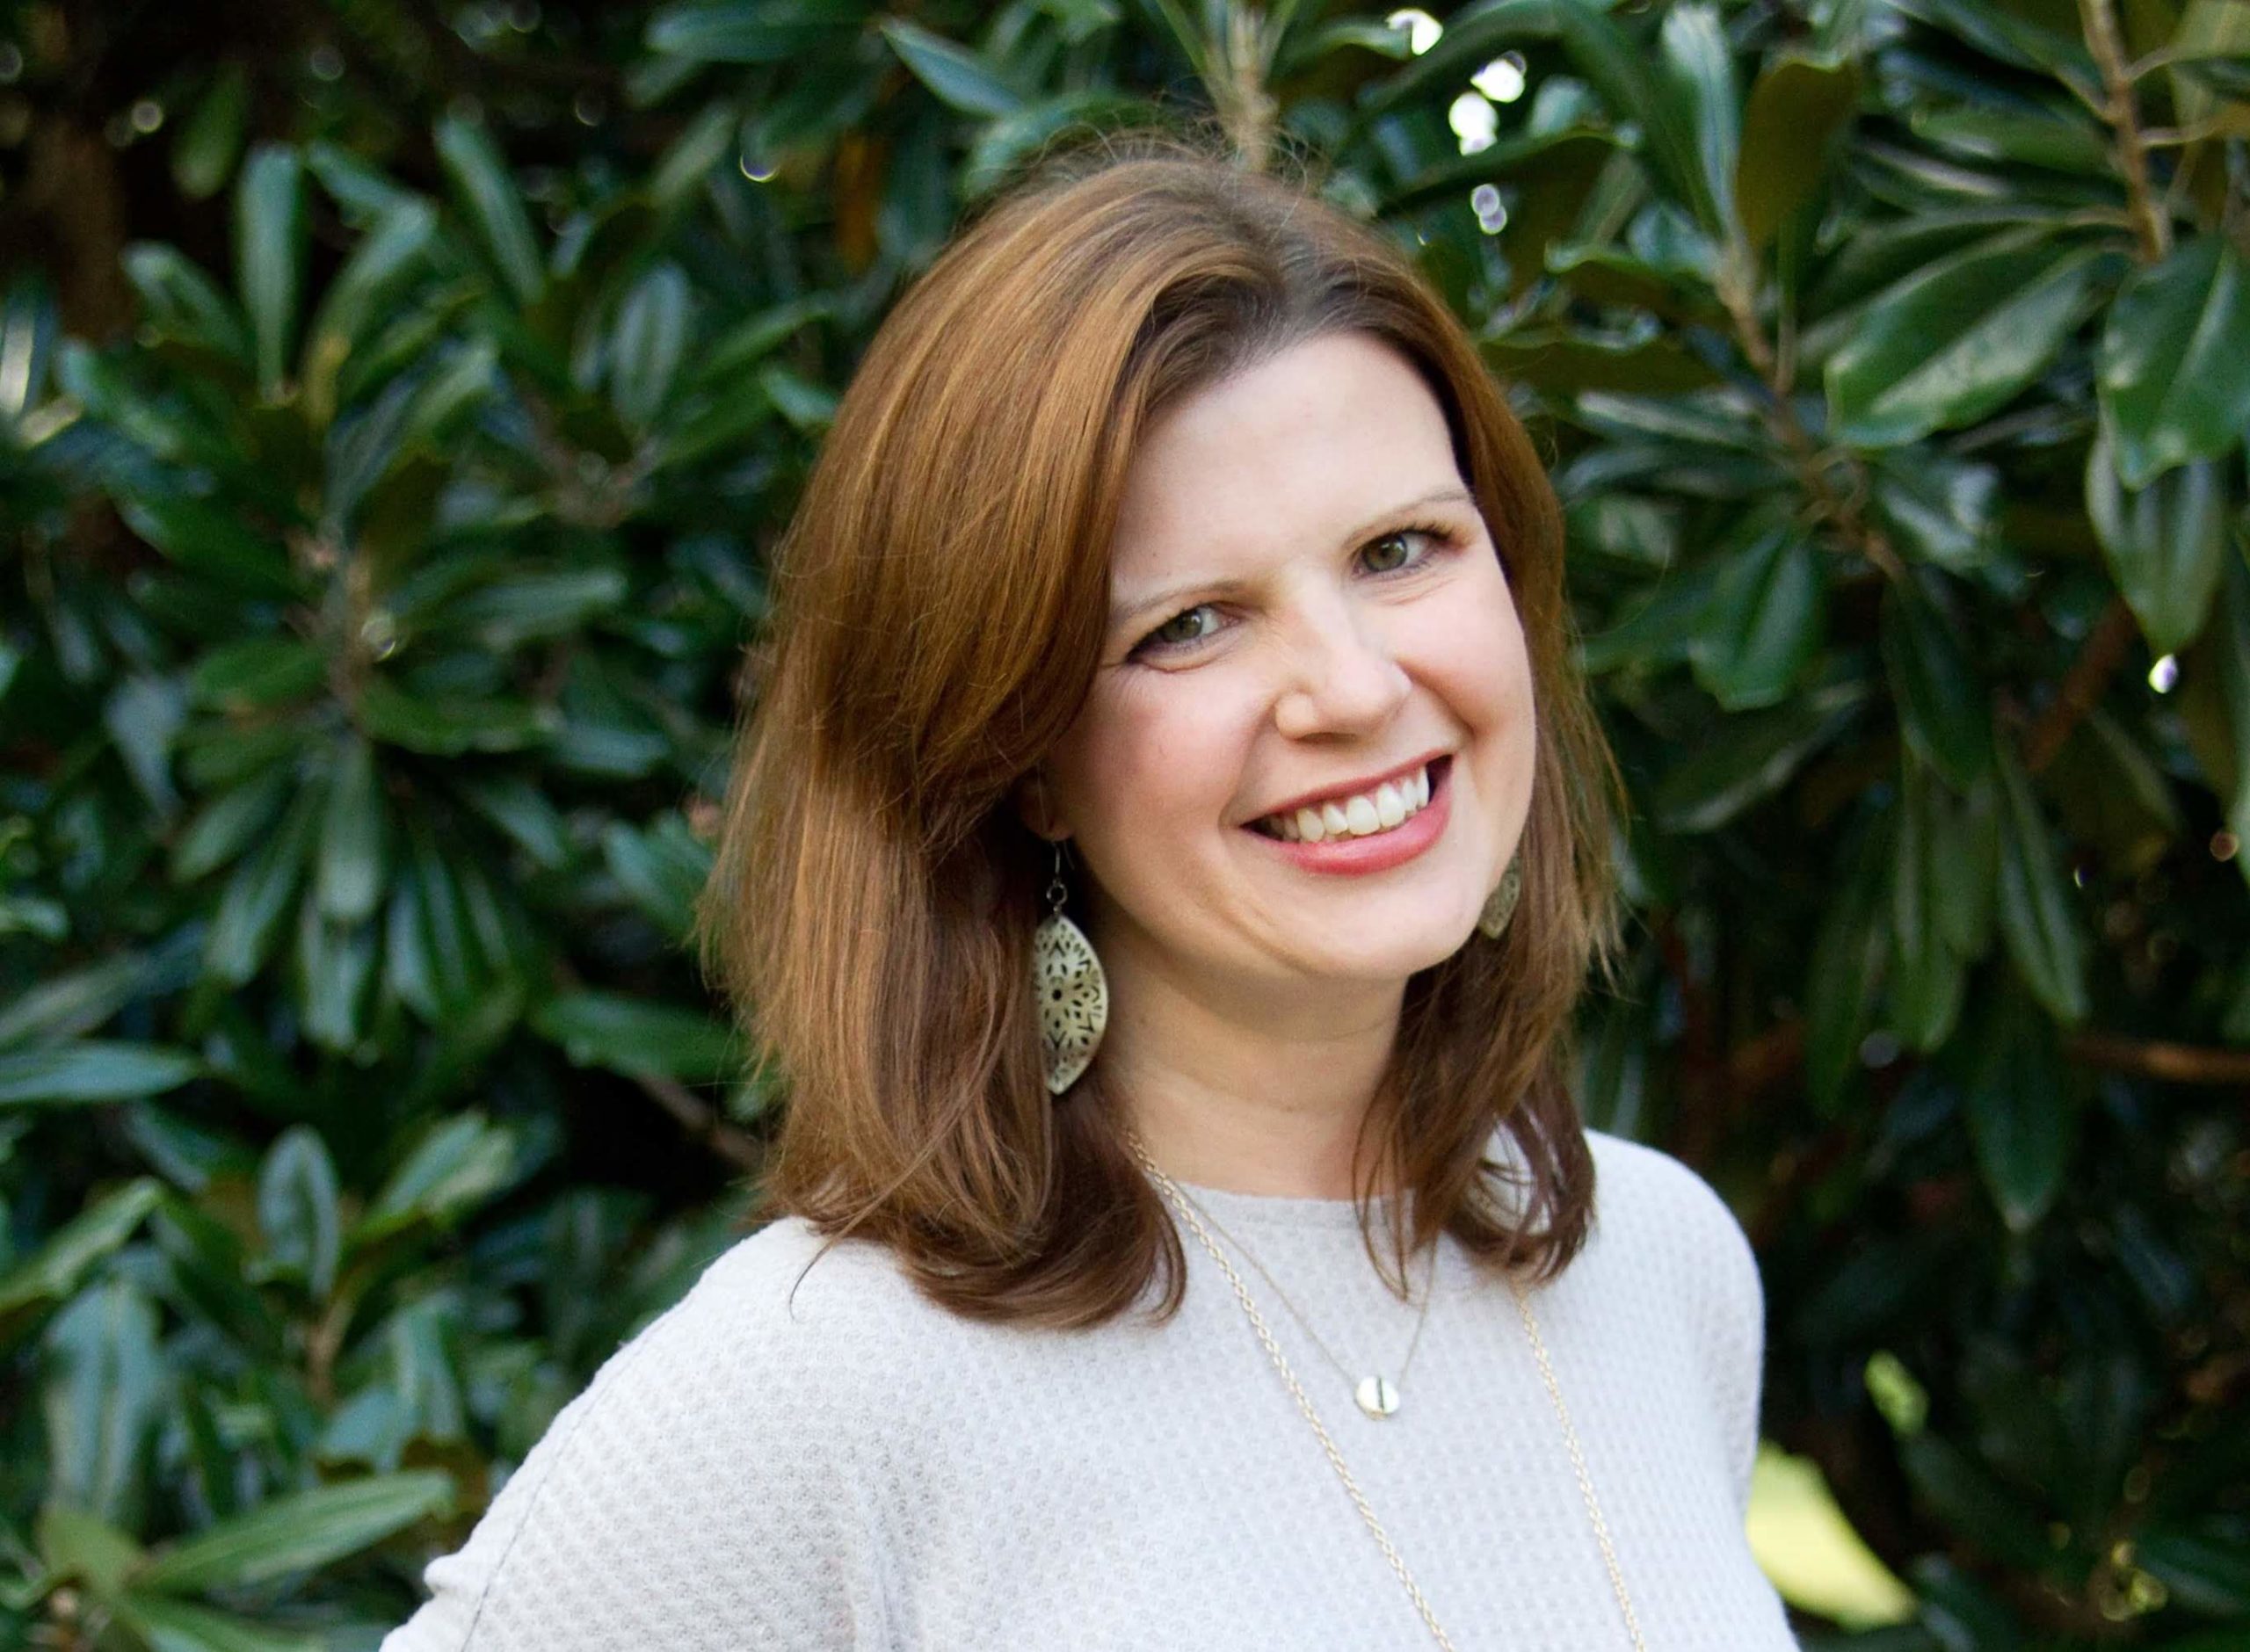 Shine Like the Noonday: An Interview with Laura Leigh Moseley